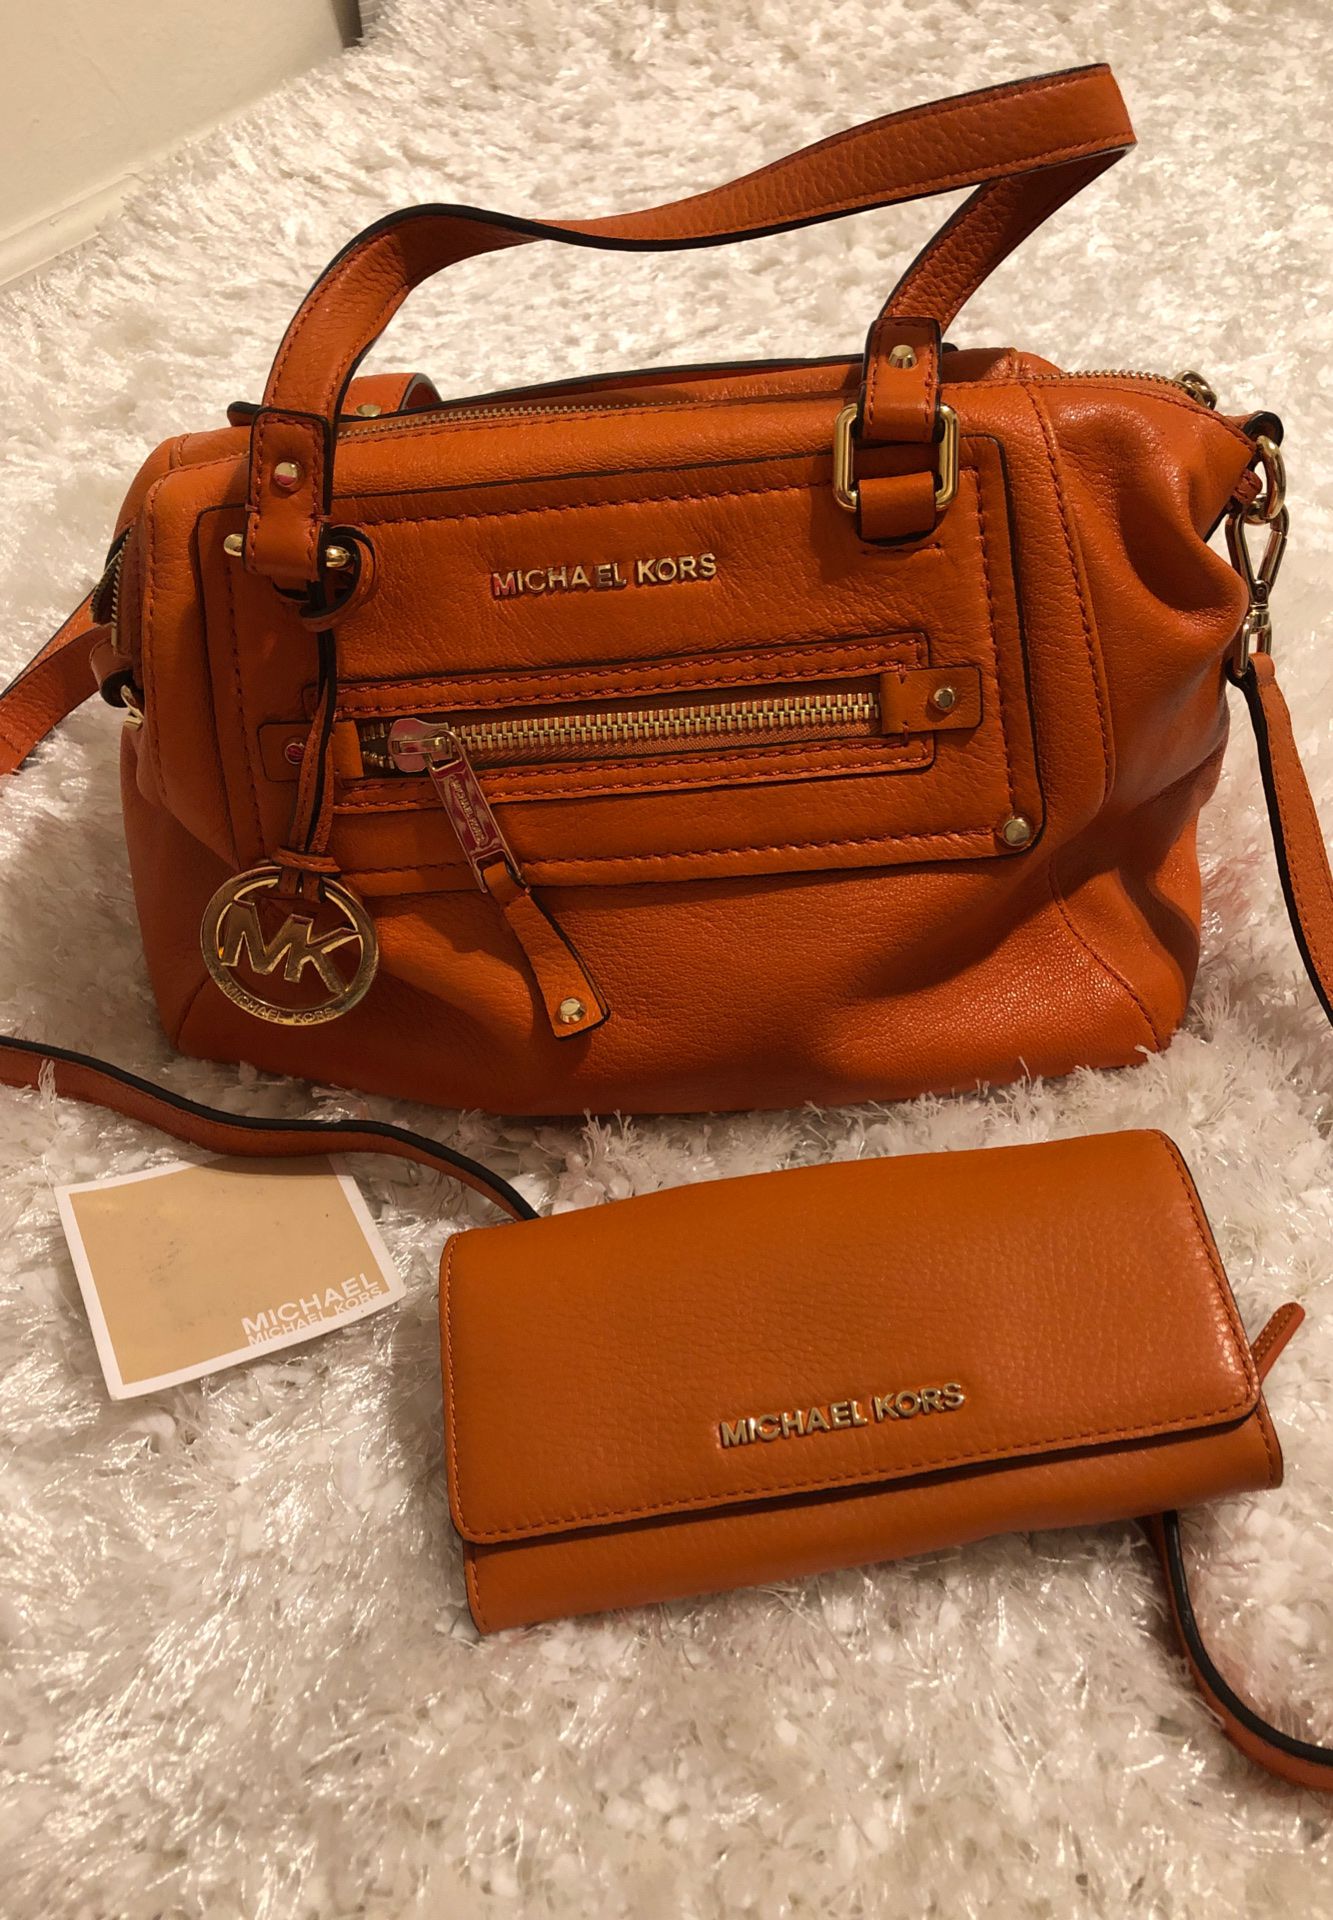 MK purse with matching wallet